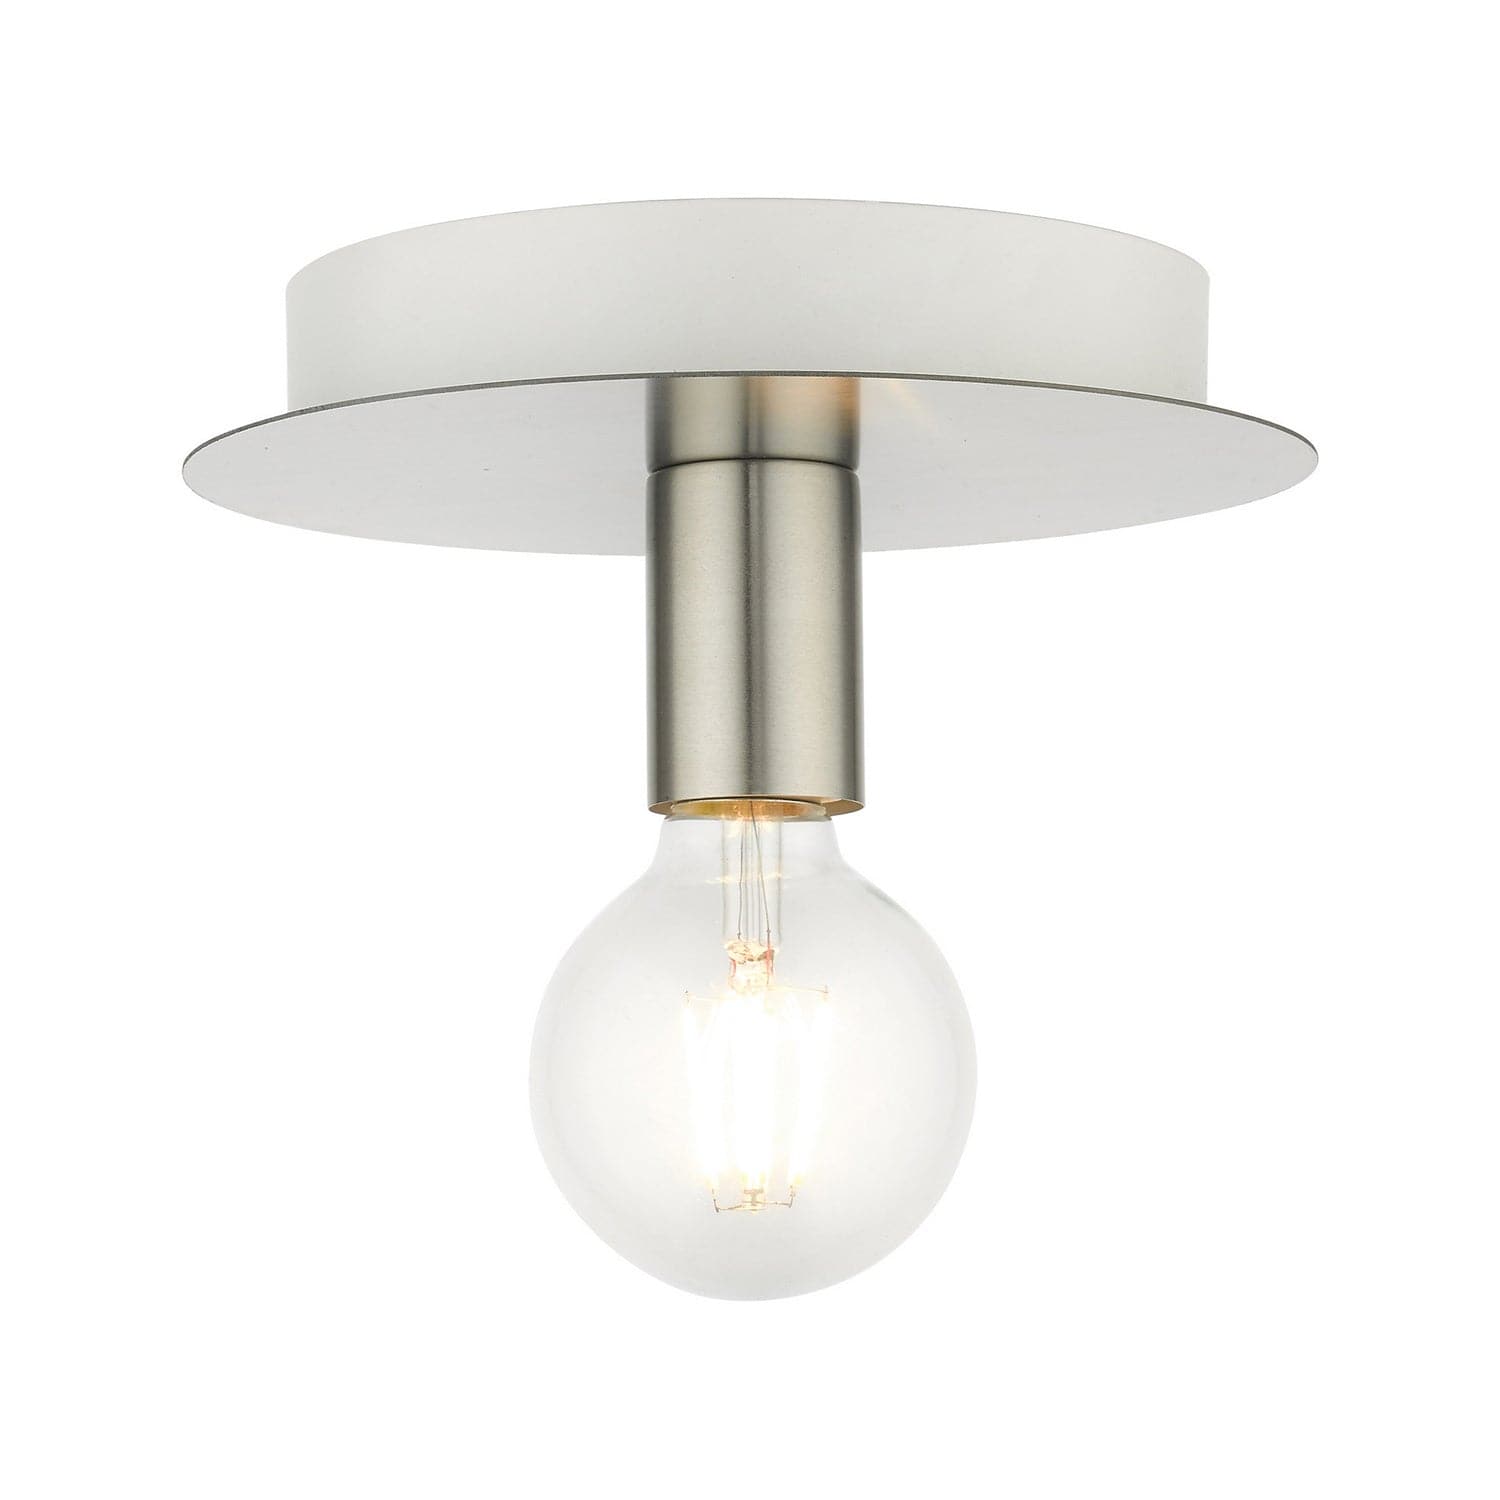 Livex Lighting - 45871-91 - One Light Flush Mount - Hillview - Brushed Nickel w/ White Canopy